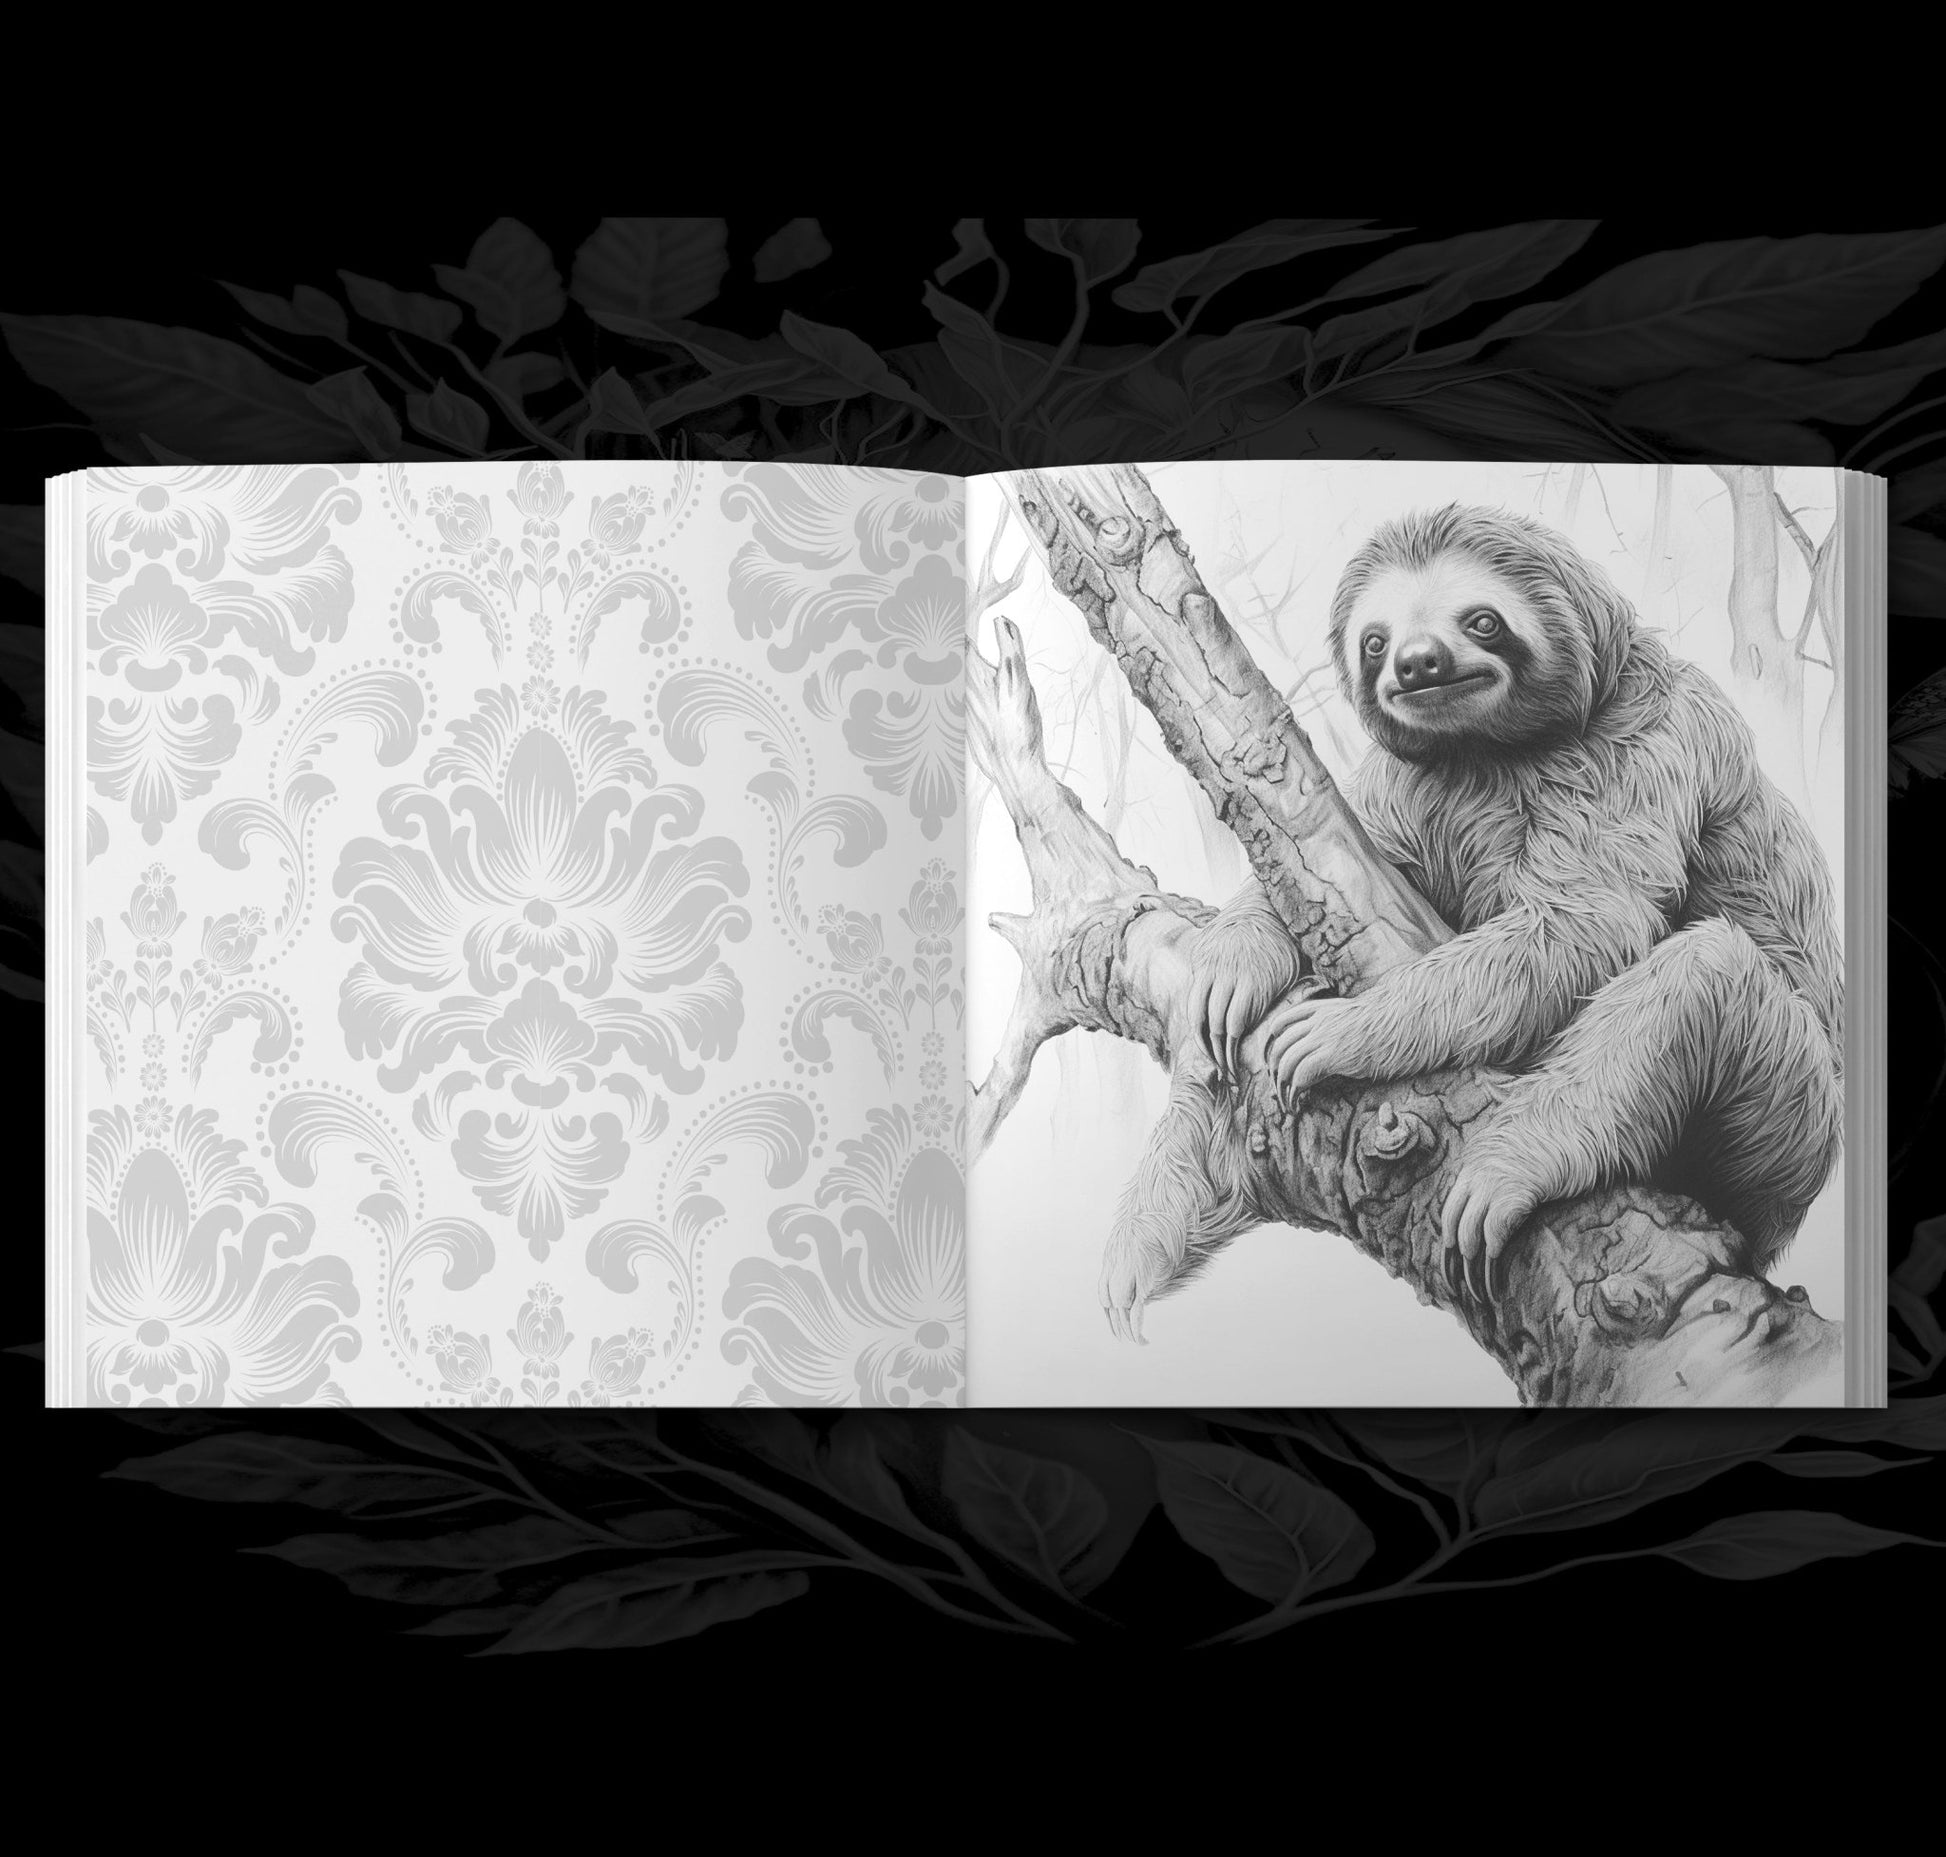 Sloth Coloring Book for Adults Grayscale (Printbook) - Monsoon Publishing USA